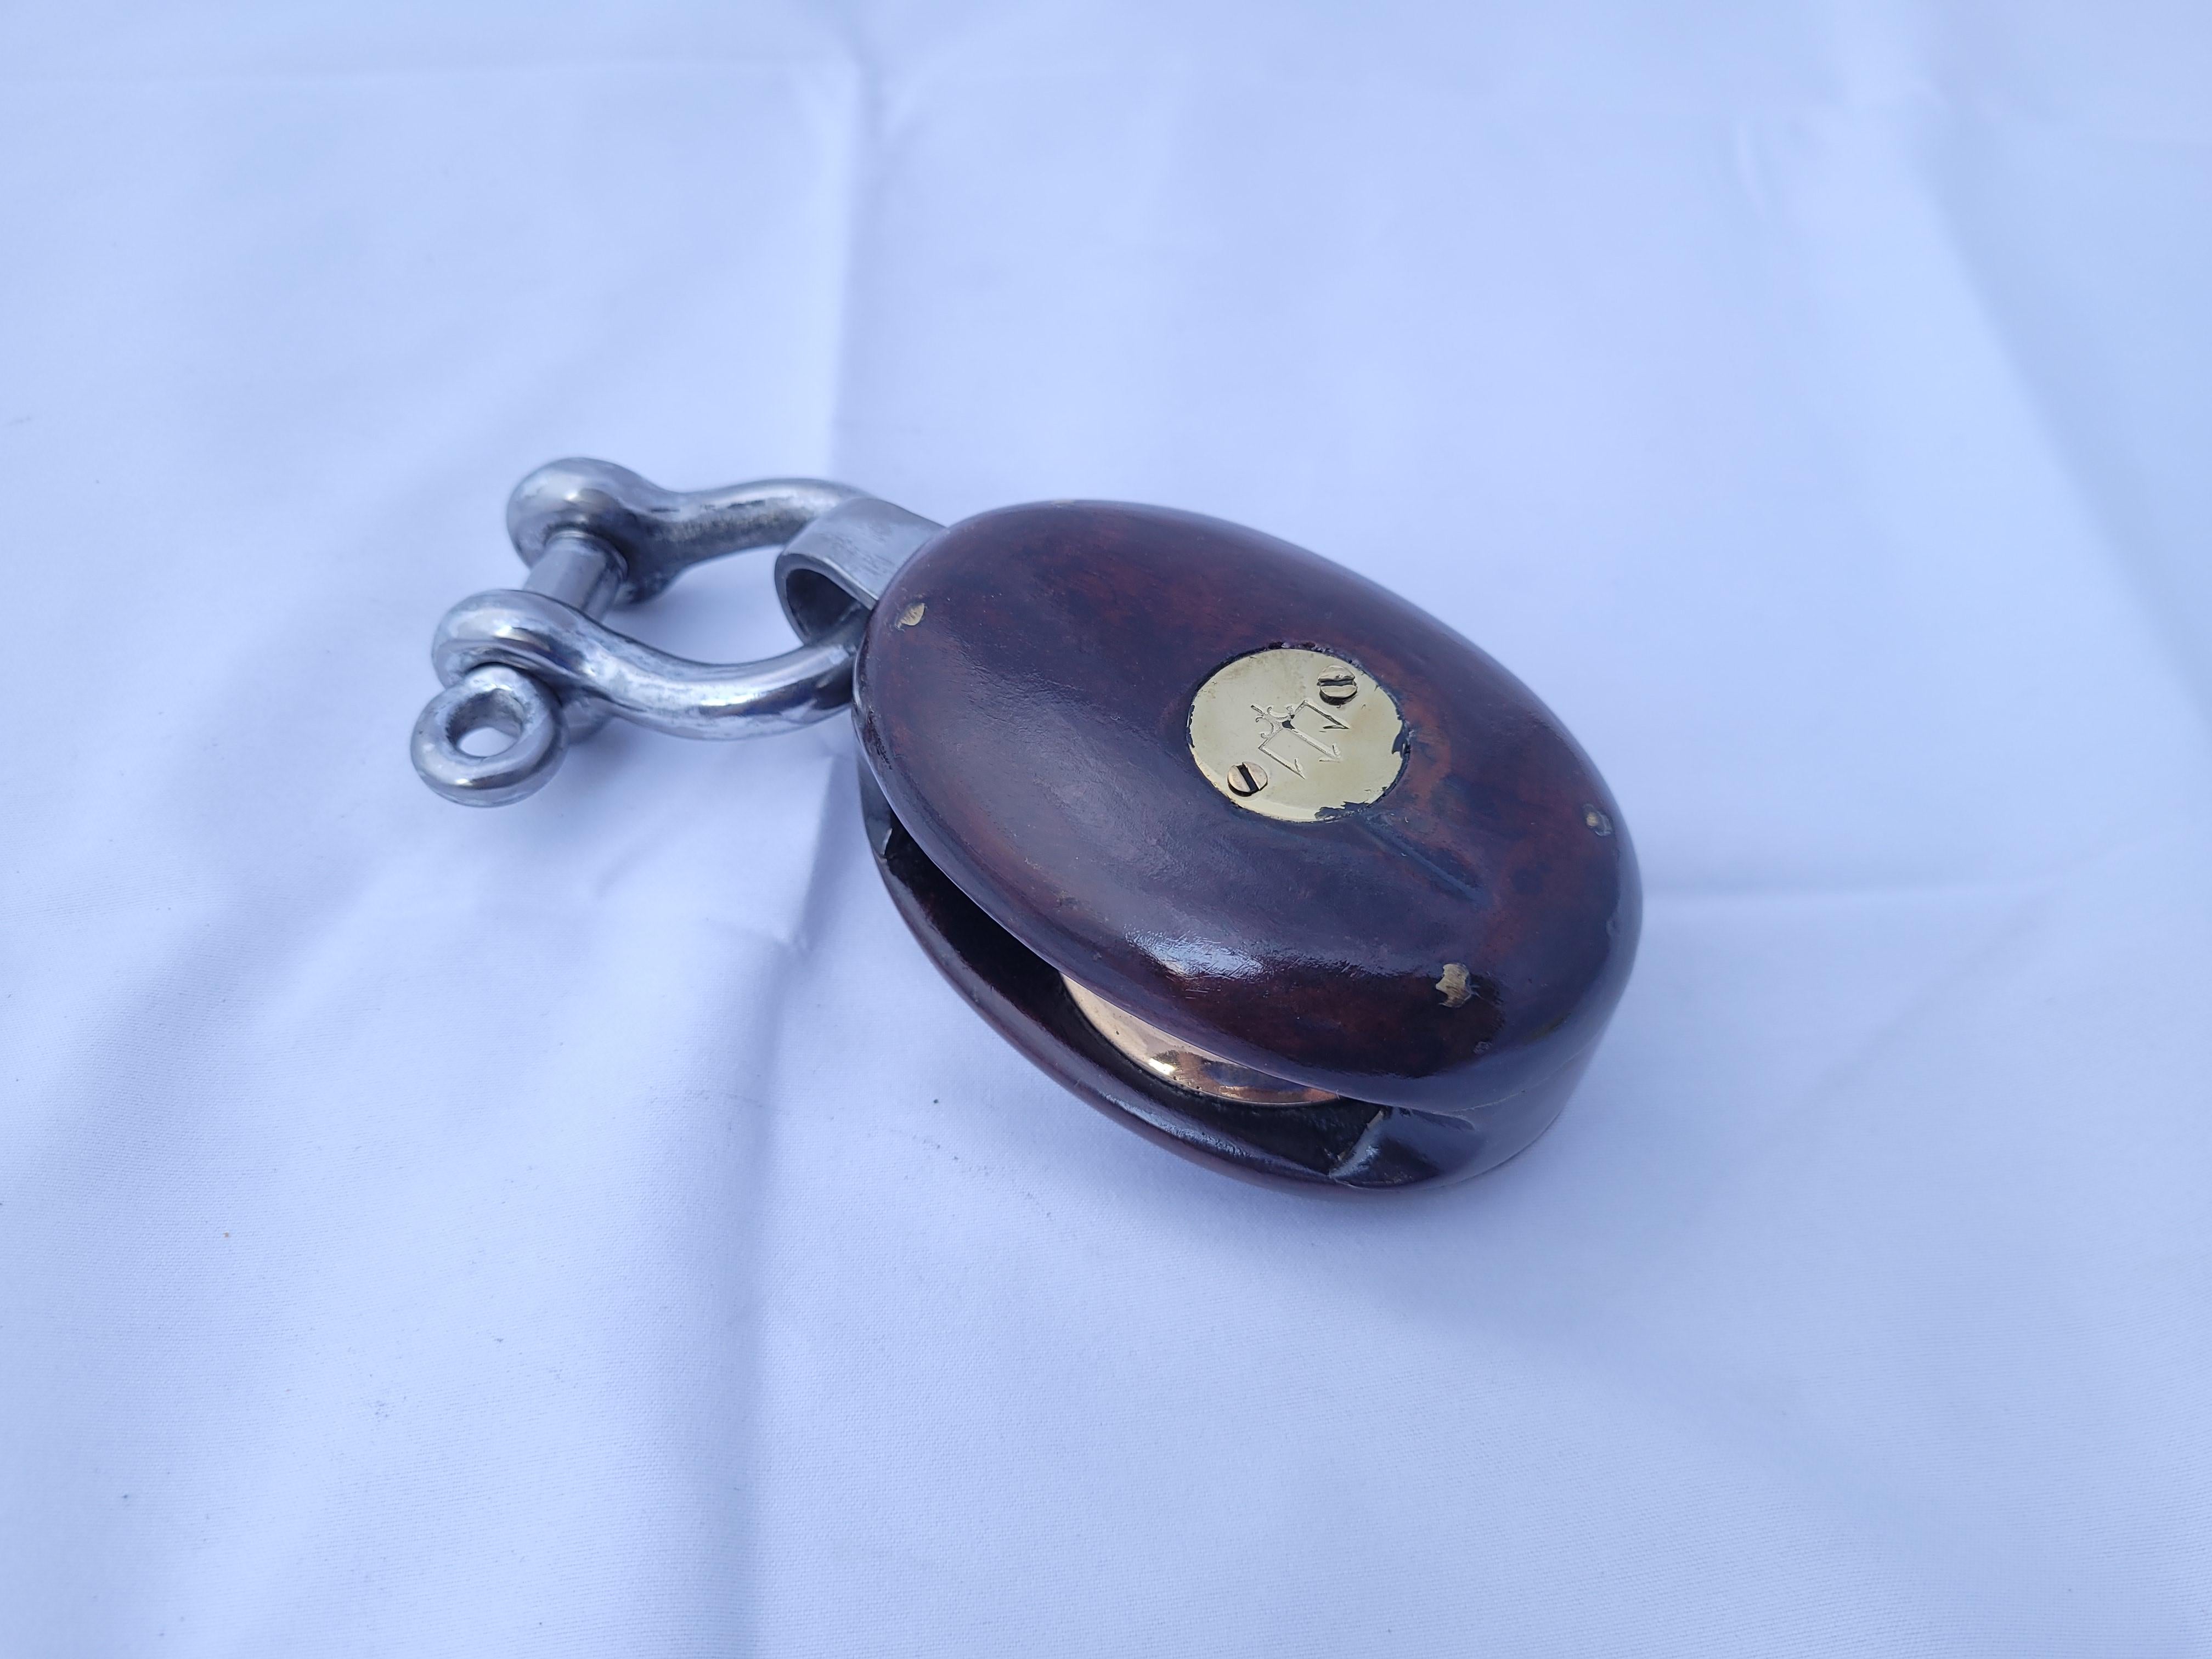 Nautical pulley block by Merriman from the early twentieth century. Brass badges with trident symbols. This relic has been meticulously restored. The rosewood body holds the brass sheave. Polished steel shackle

Weight 2 lbs
Overall Dimensions 2